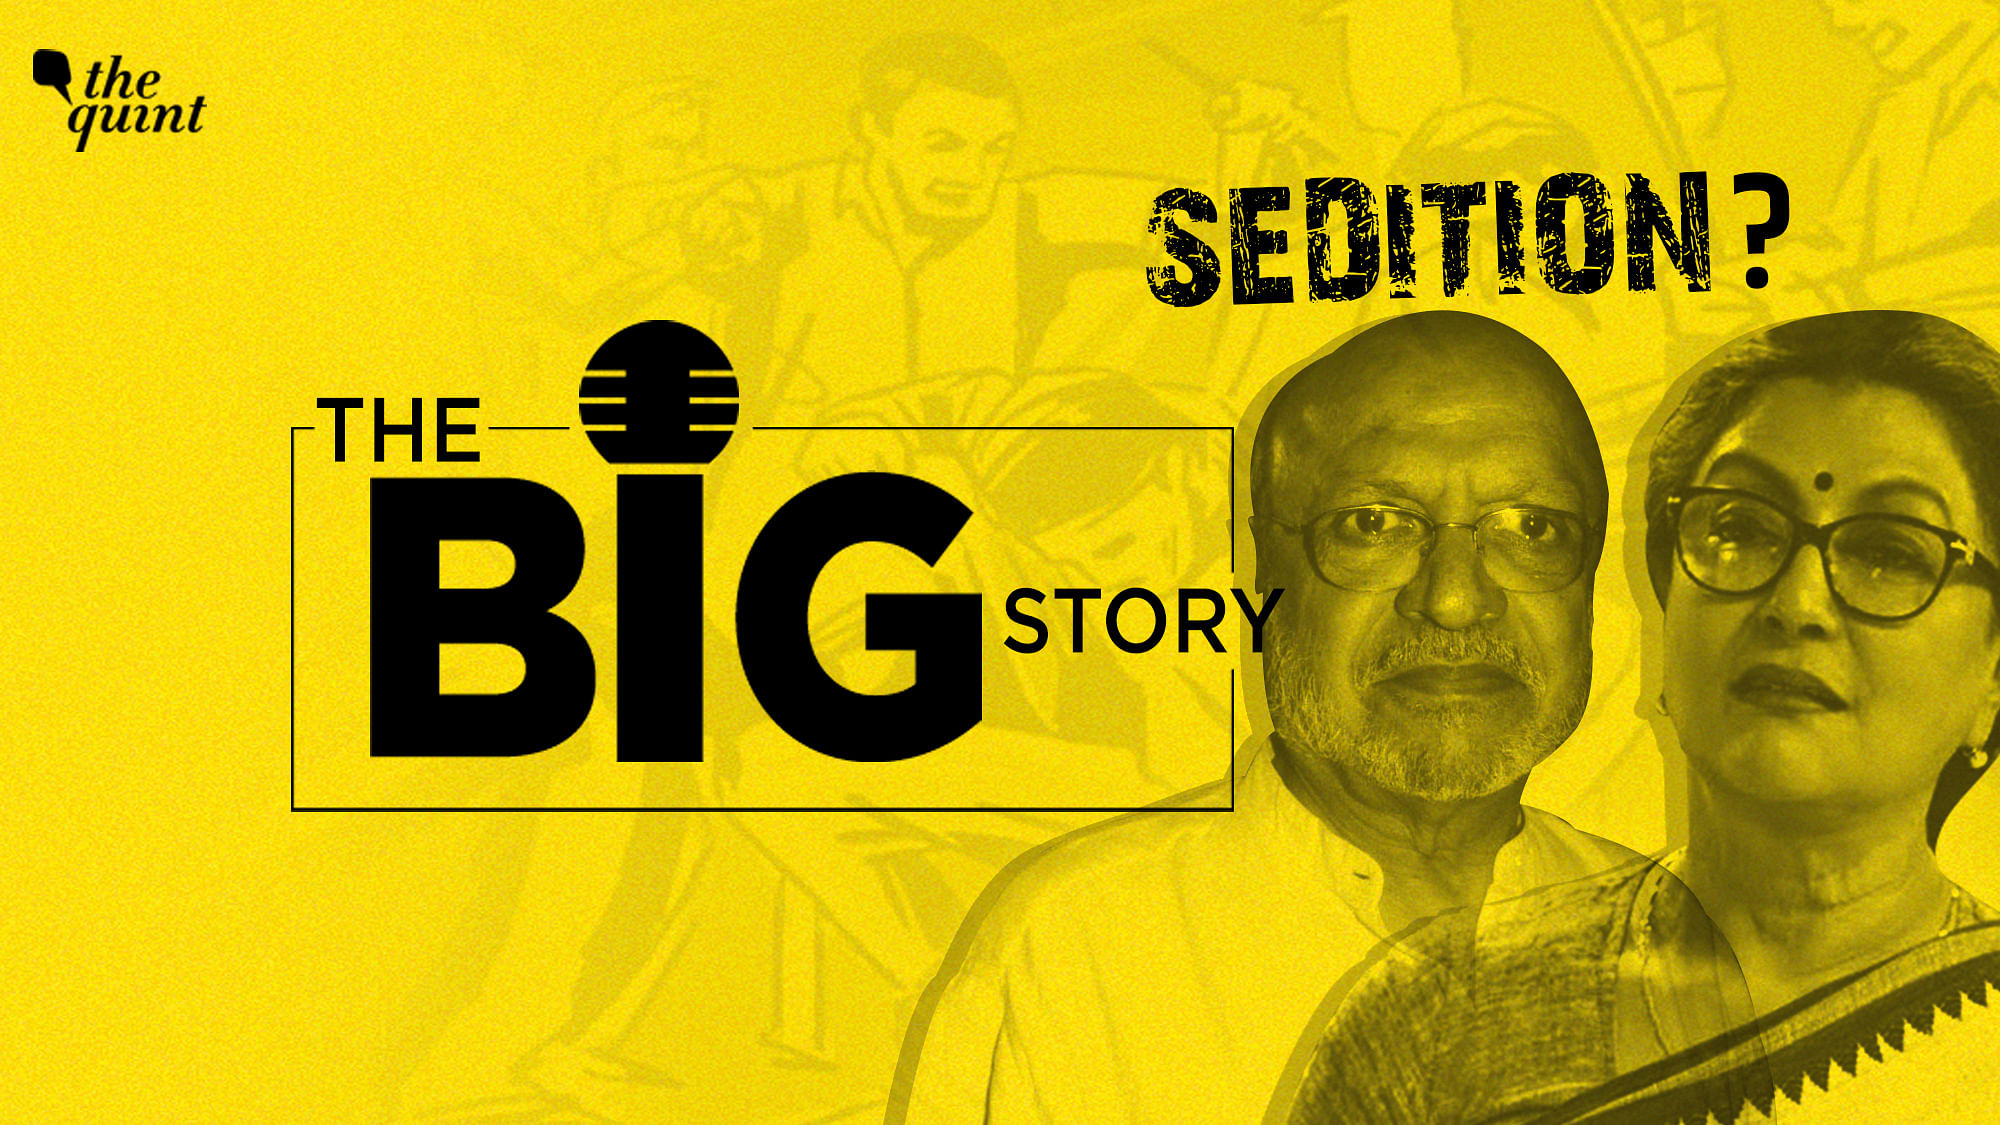 Is dissent seditious? If you disagree with your government, are you automatically committing sedition? That’s what we’re looking at in this edition of The Big Story.